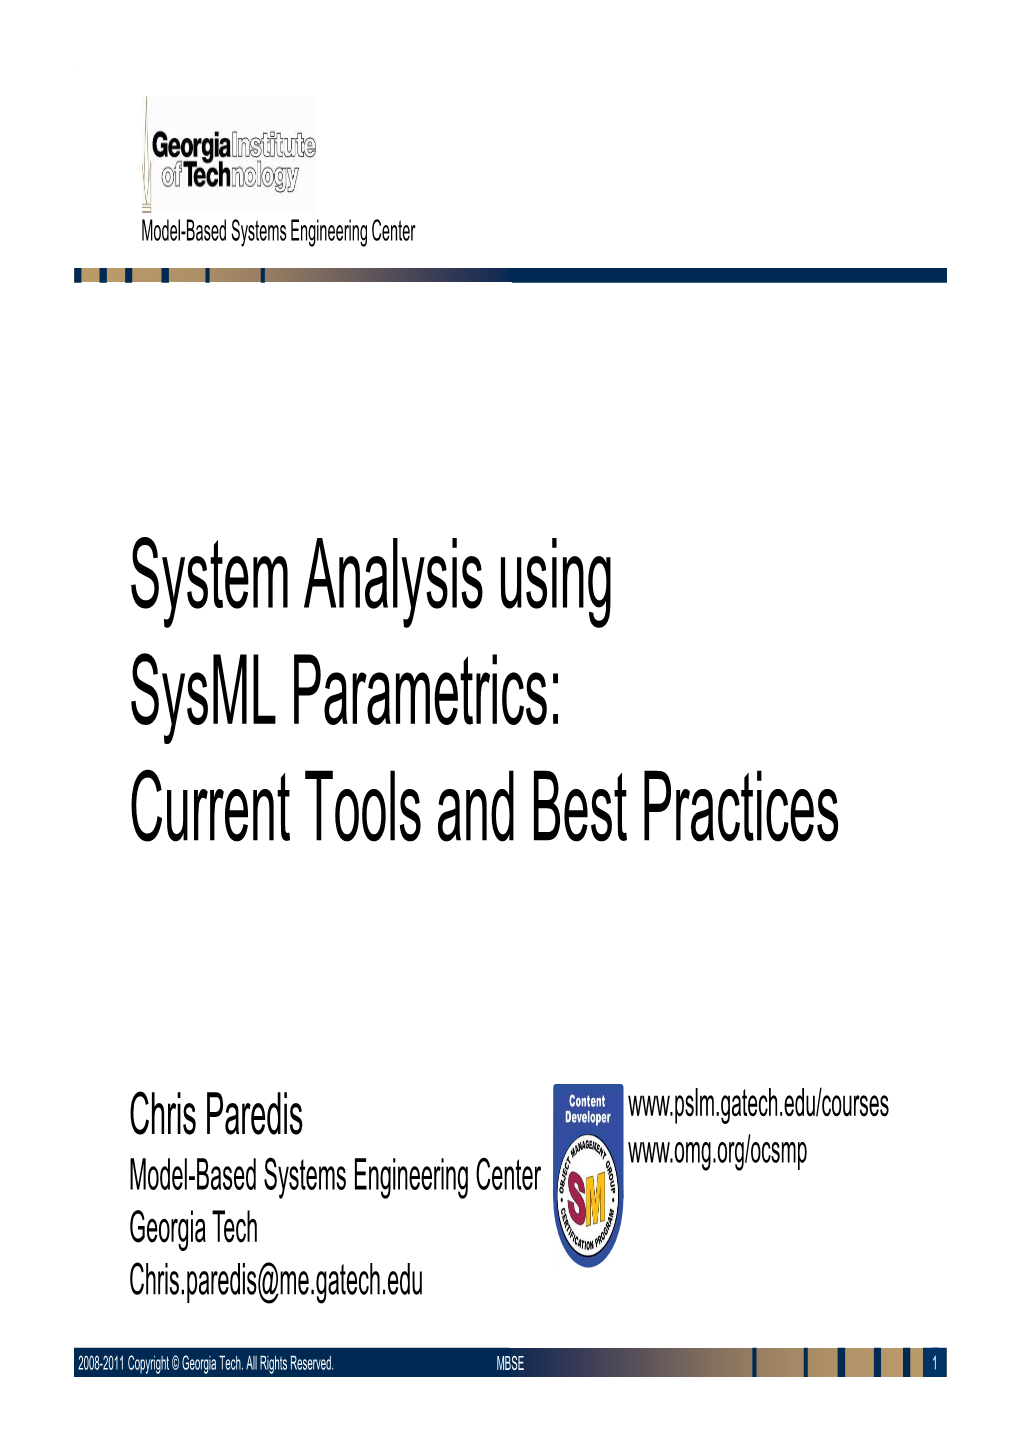 Sysml Parametrics: Current Tools and Best Practices